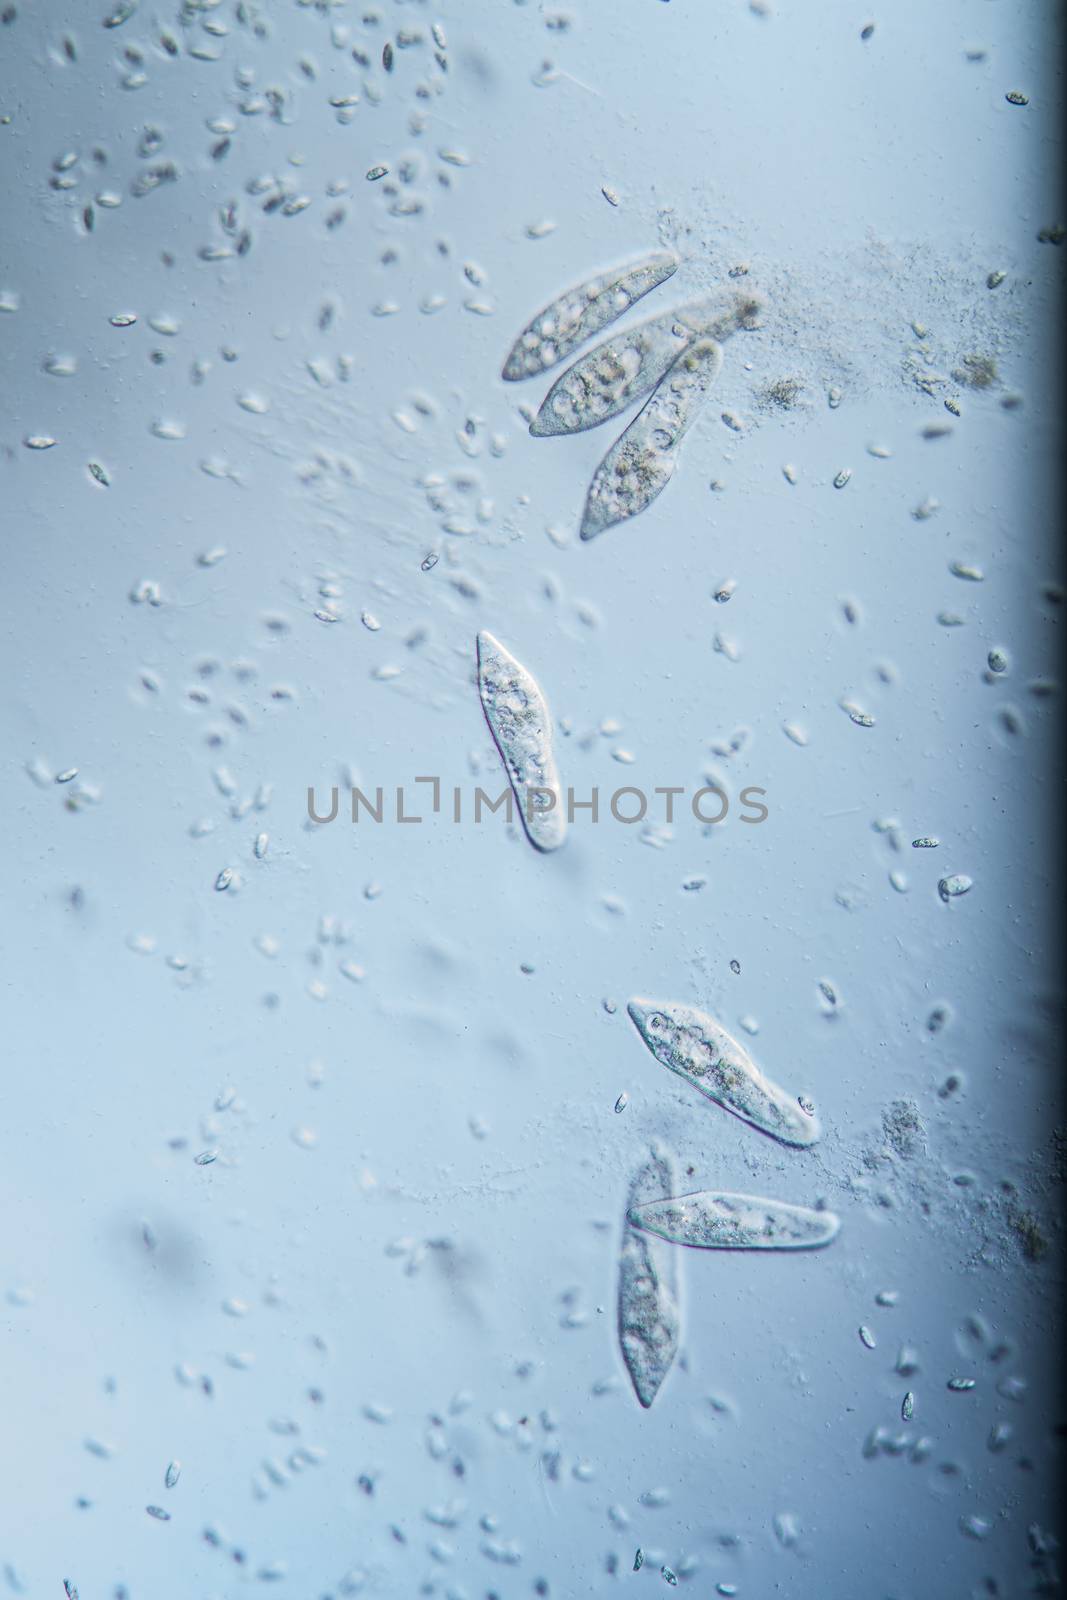 Ciliate plankton unicellular in drops of water 100x by Dr-Lange